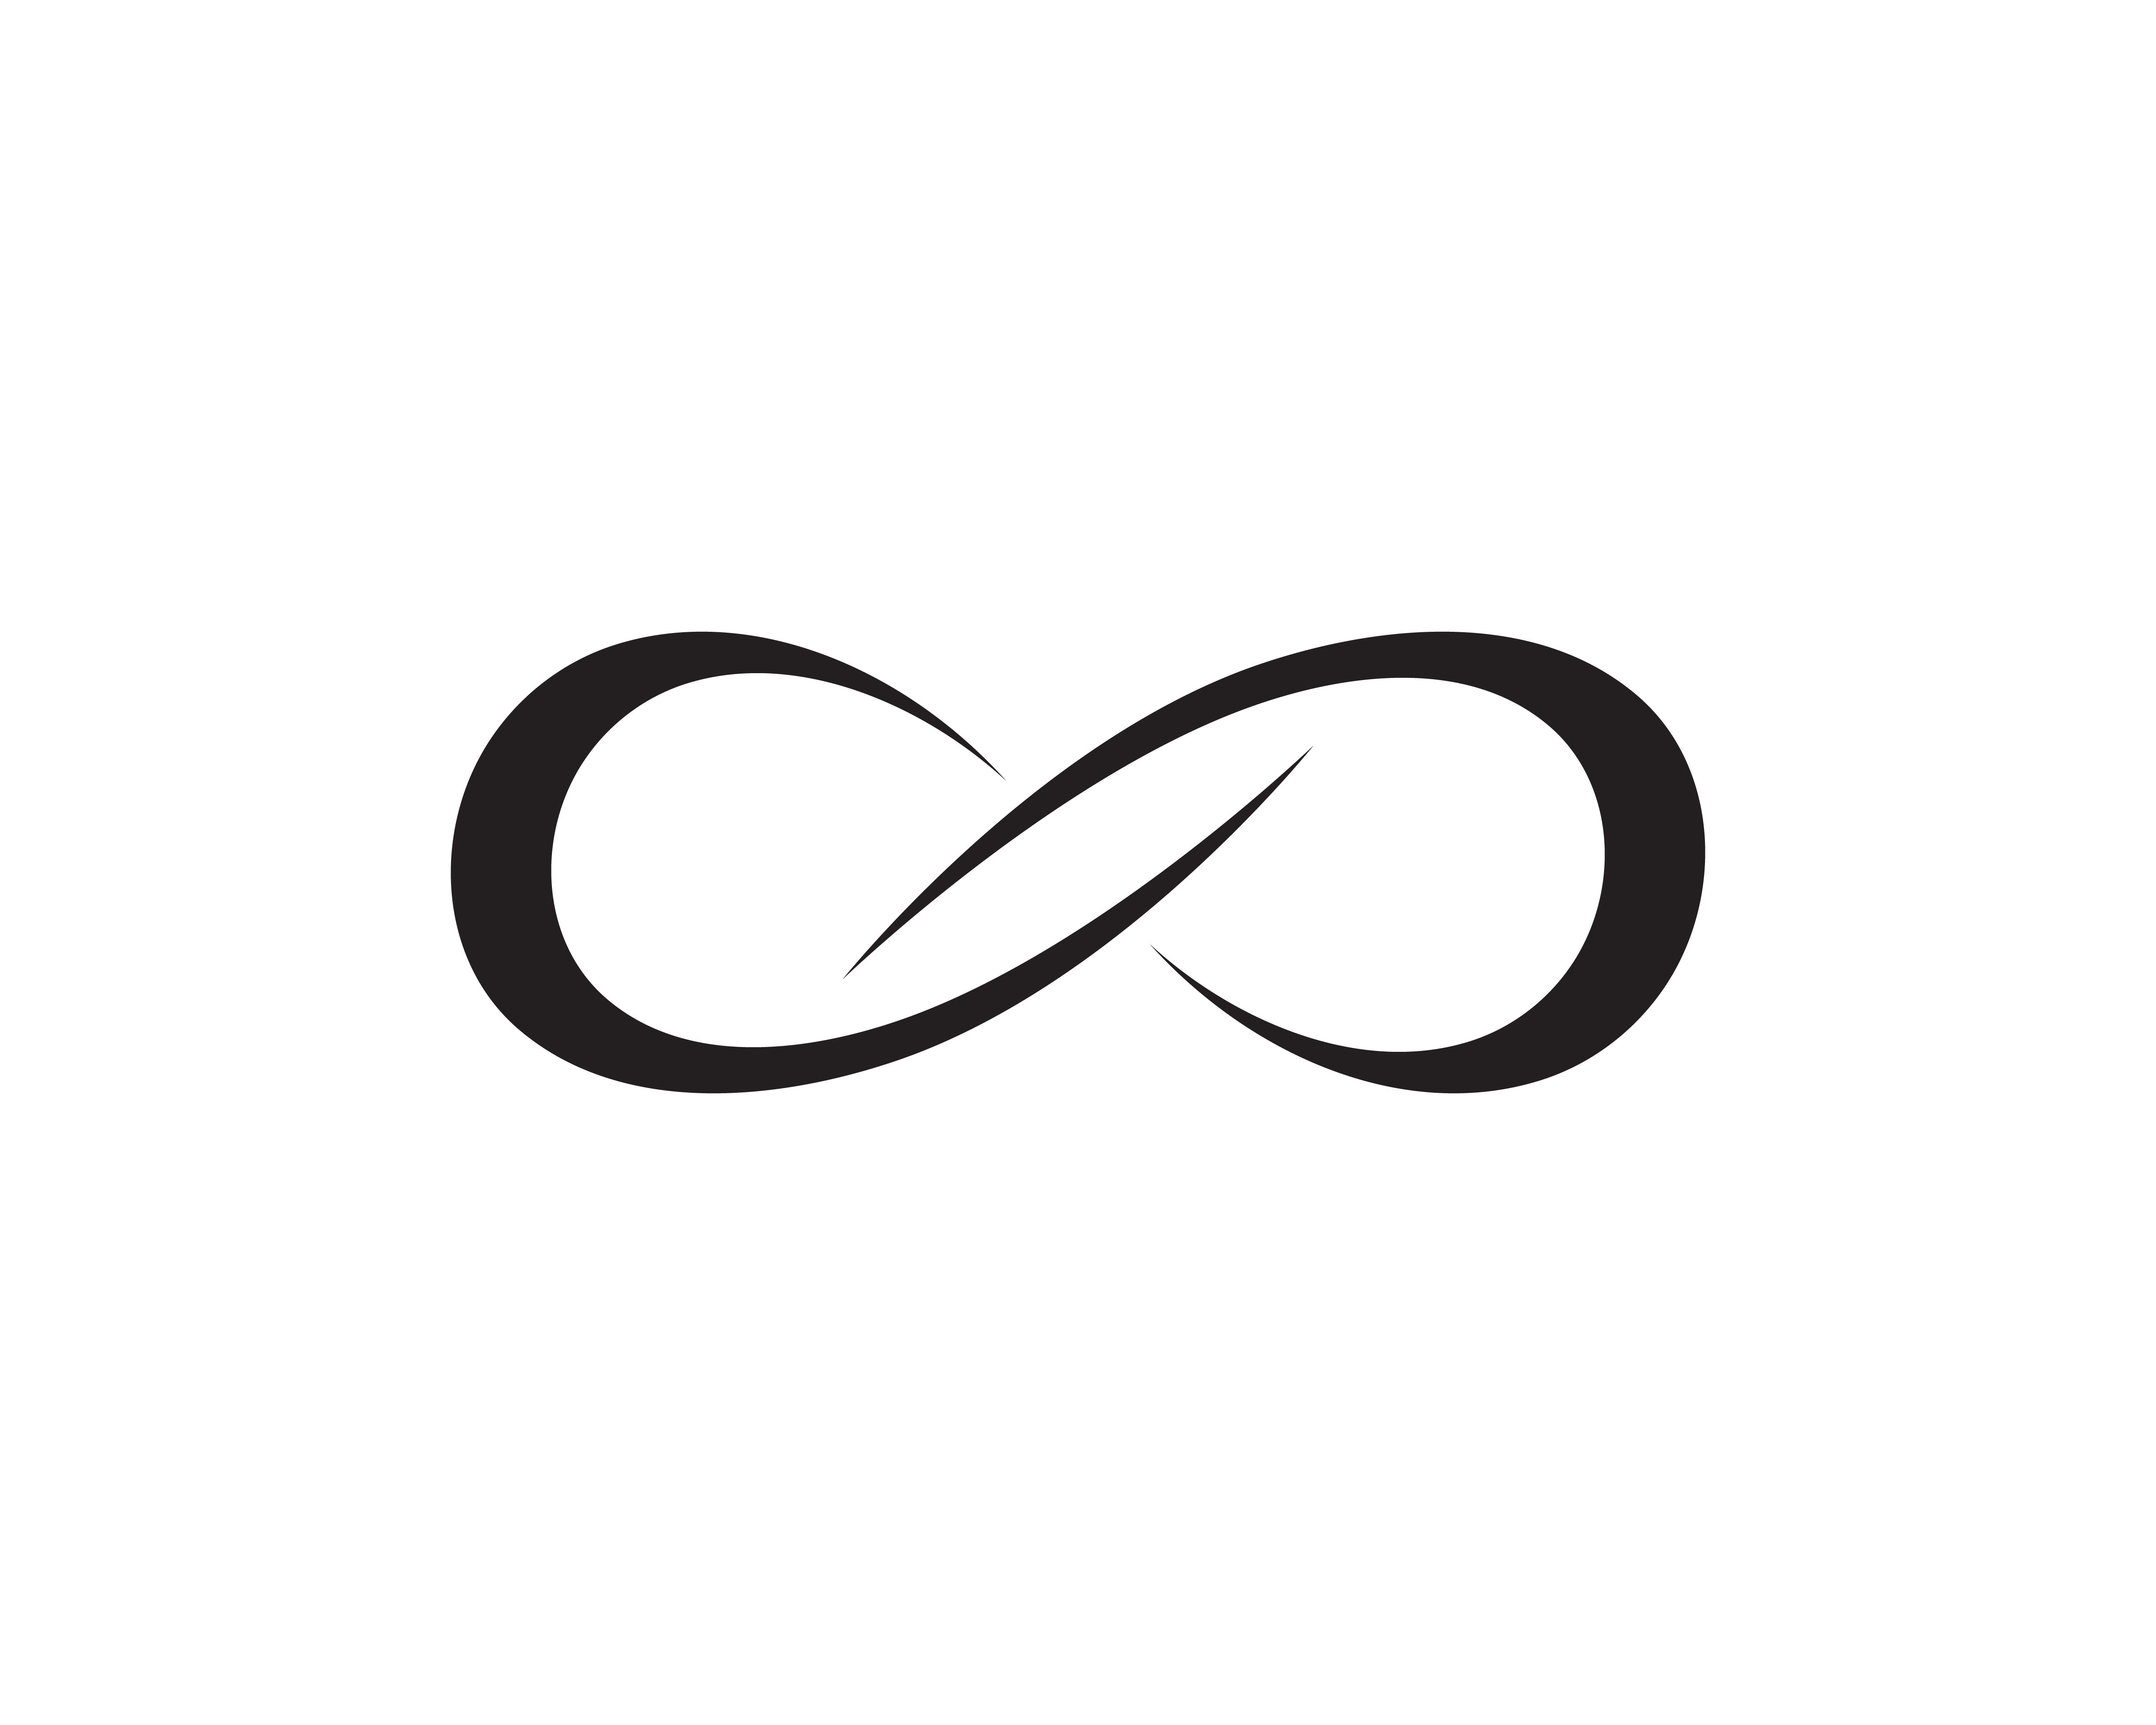 Infinity logo and symbol template icons vector